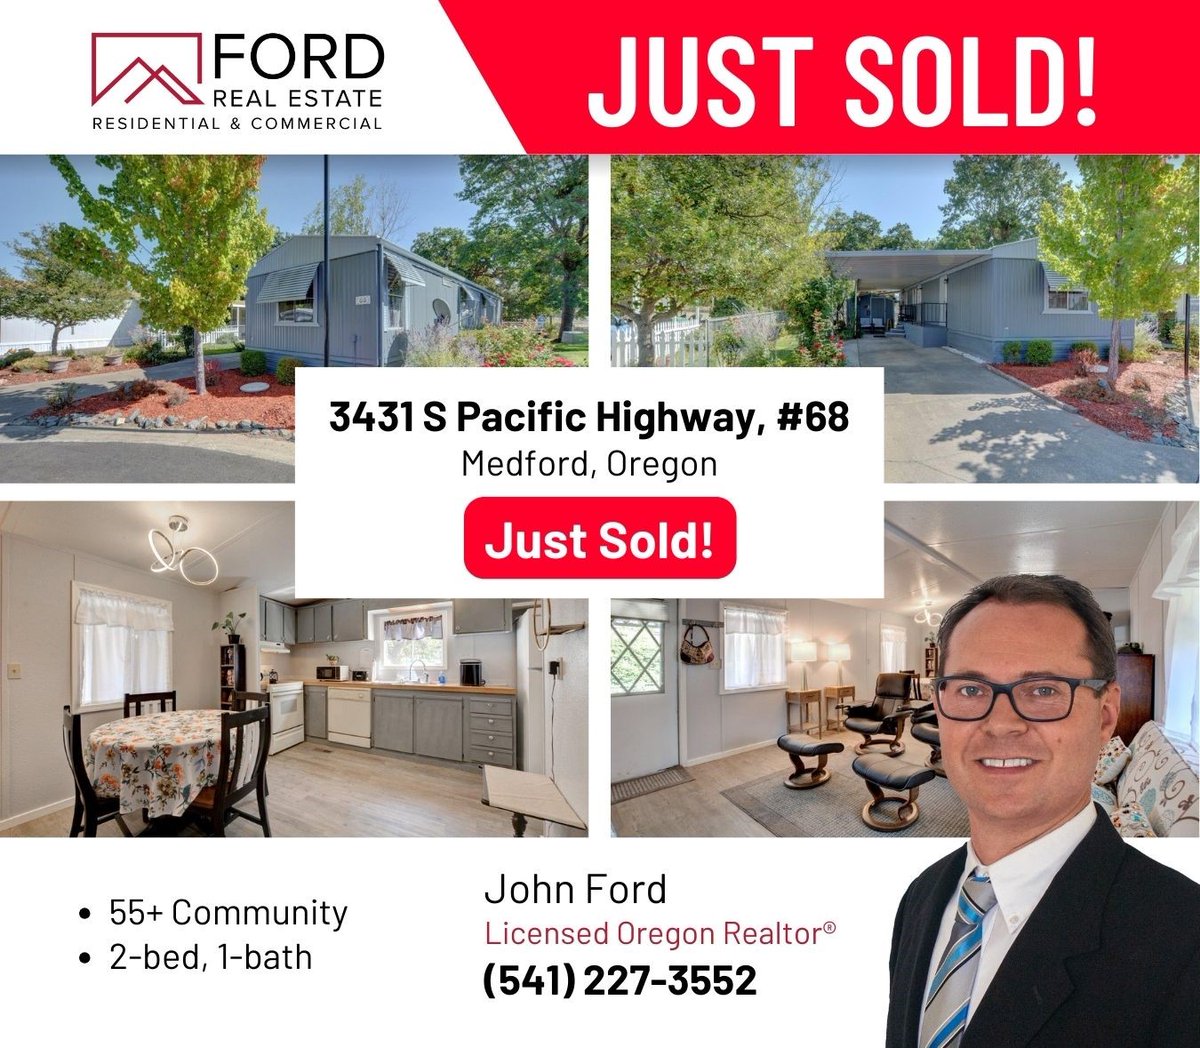 🎉 Another successful sale! 🏡 Congratulations to our sellers and the new homeowners of 3431 S Pacific #68, Medford Oregon! 🥳 #JustSold #NewHomeowners #Realtor #RealEstate #SouthernOregon #RogueValley #RealEstateAgent #Sold